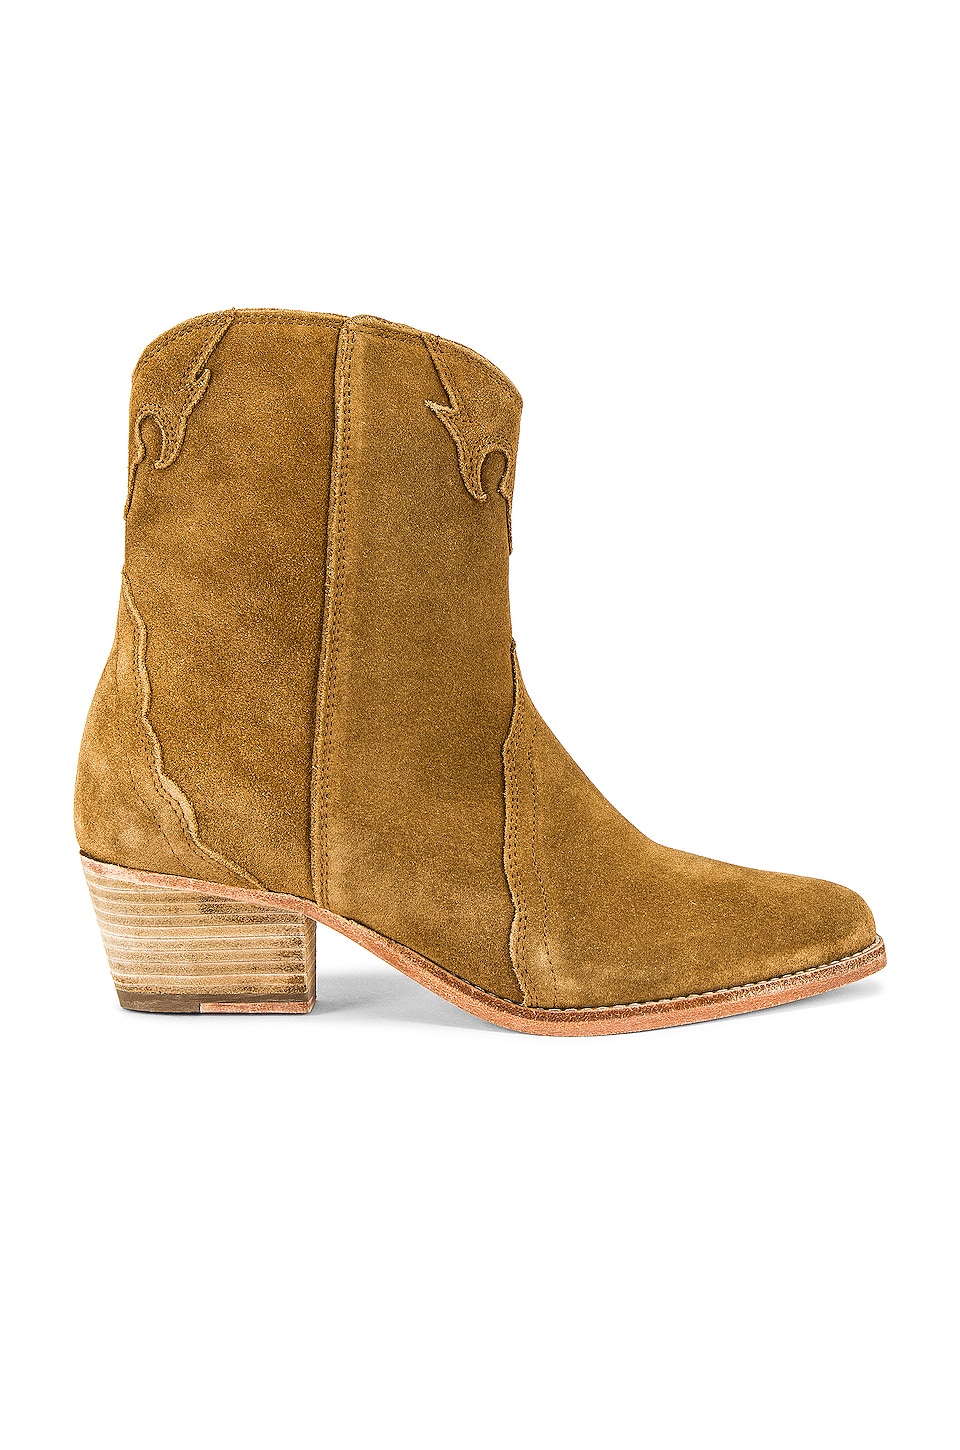 Free People New Frontier Leather Western Boot - Women's Shoes in